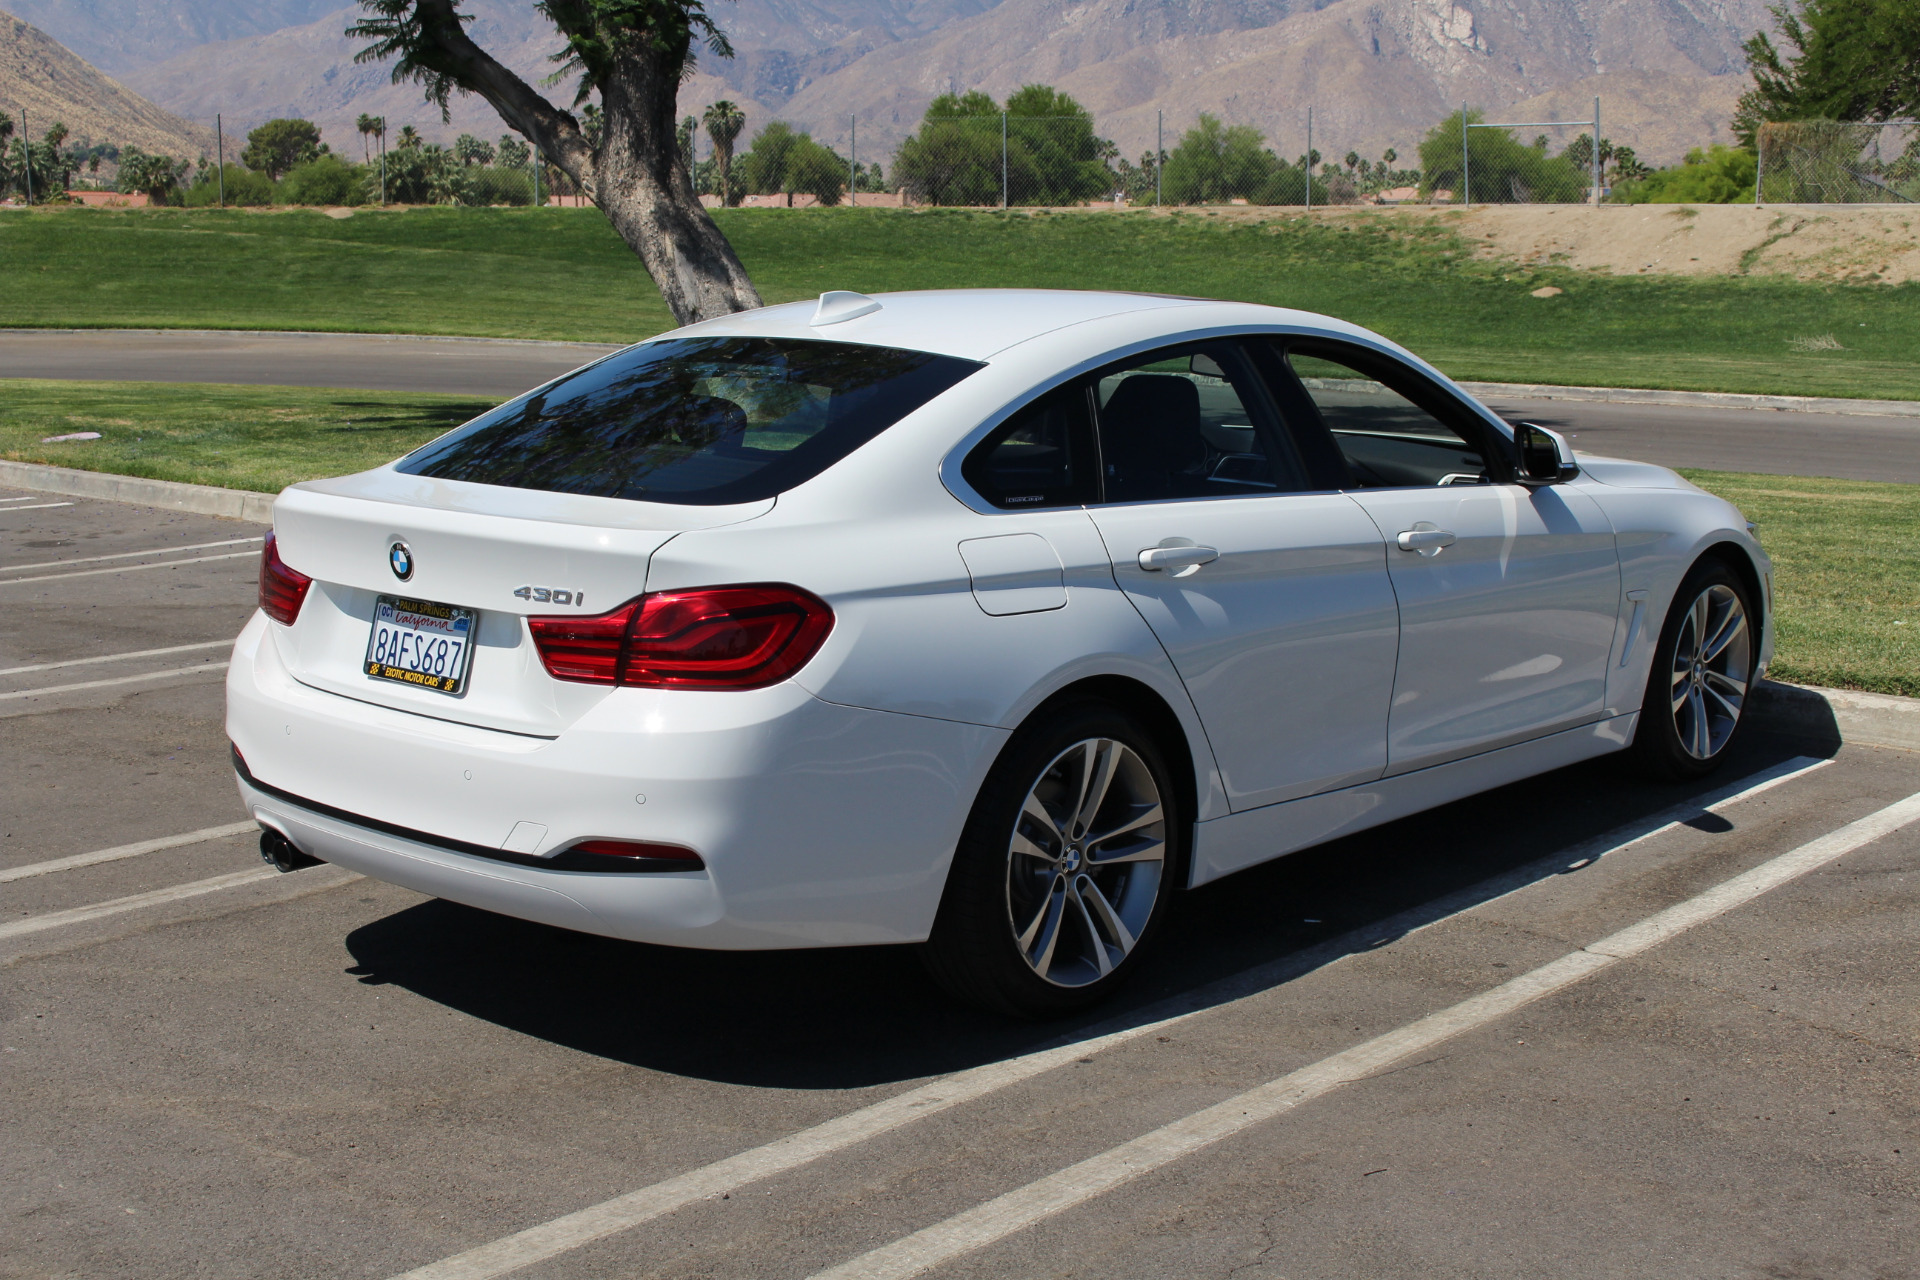 2018 BMW 4 Series 430i Gran Coupe Stock # BM161 for sale near Palm Springs,  CA | CA BMW Dealer